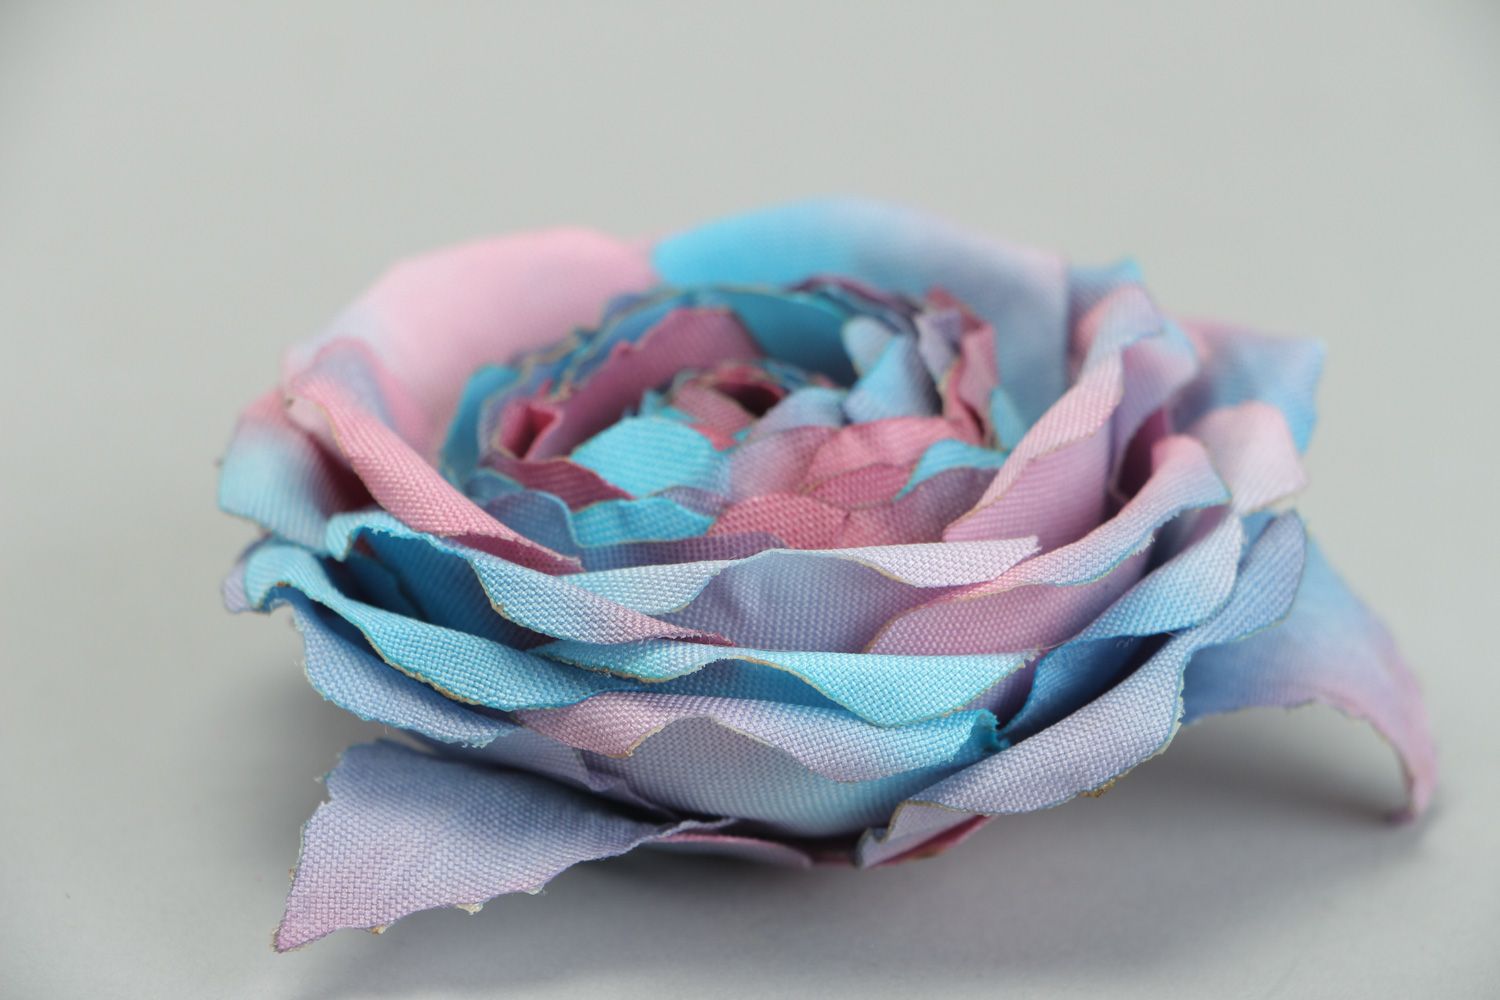 Handmade tender floral brooch made of fabric in romantic style Blue Rose photo 2